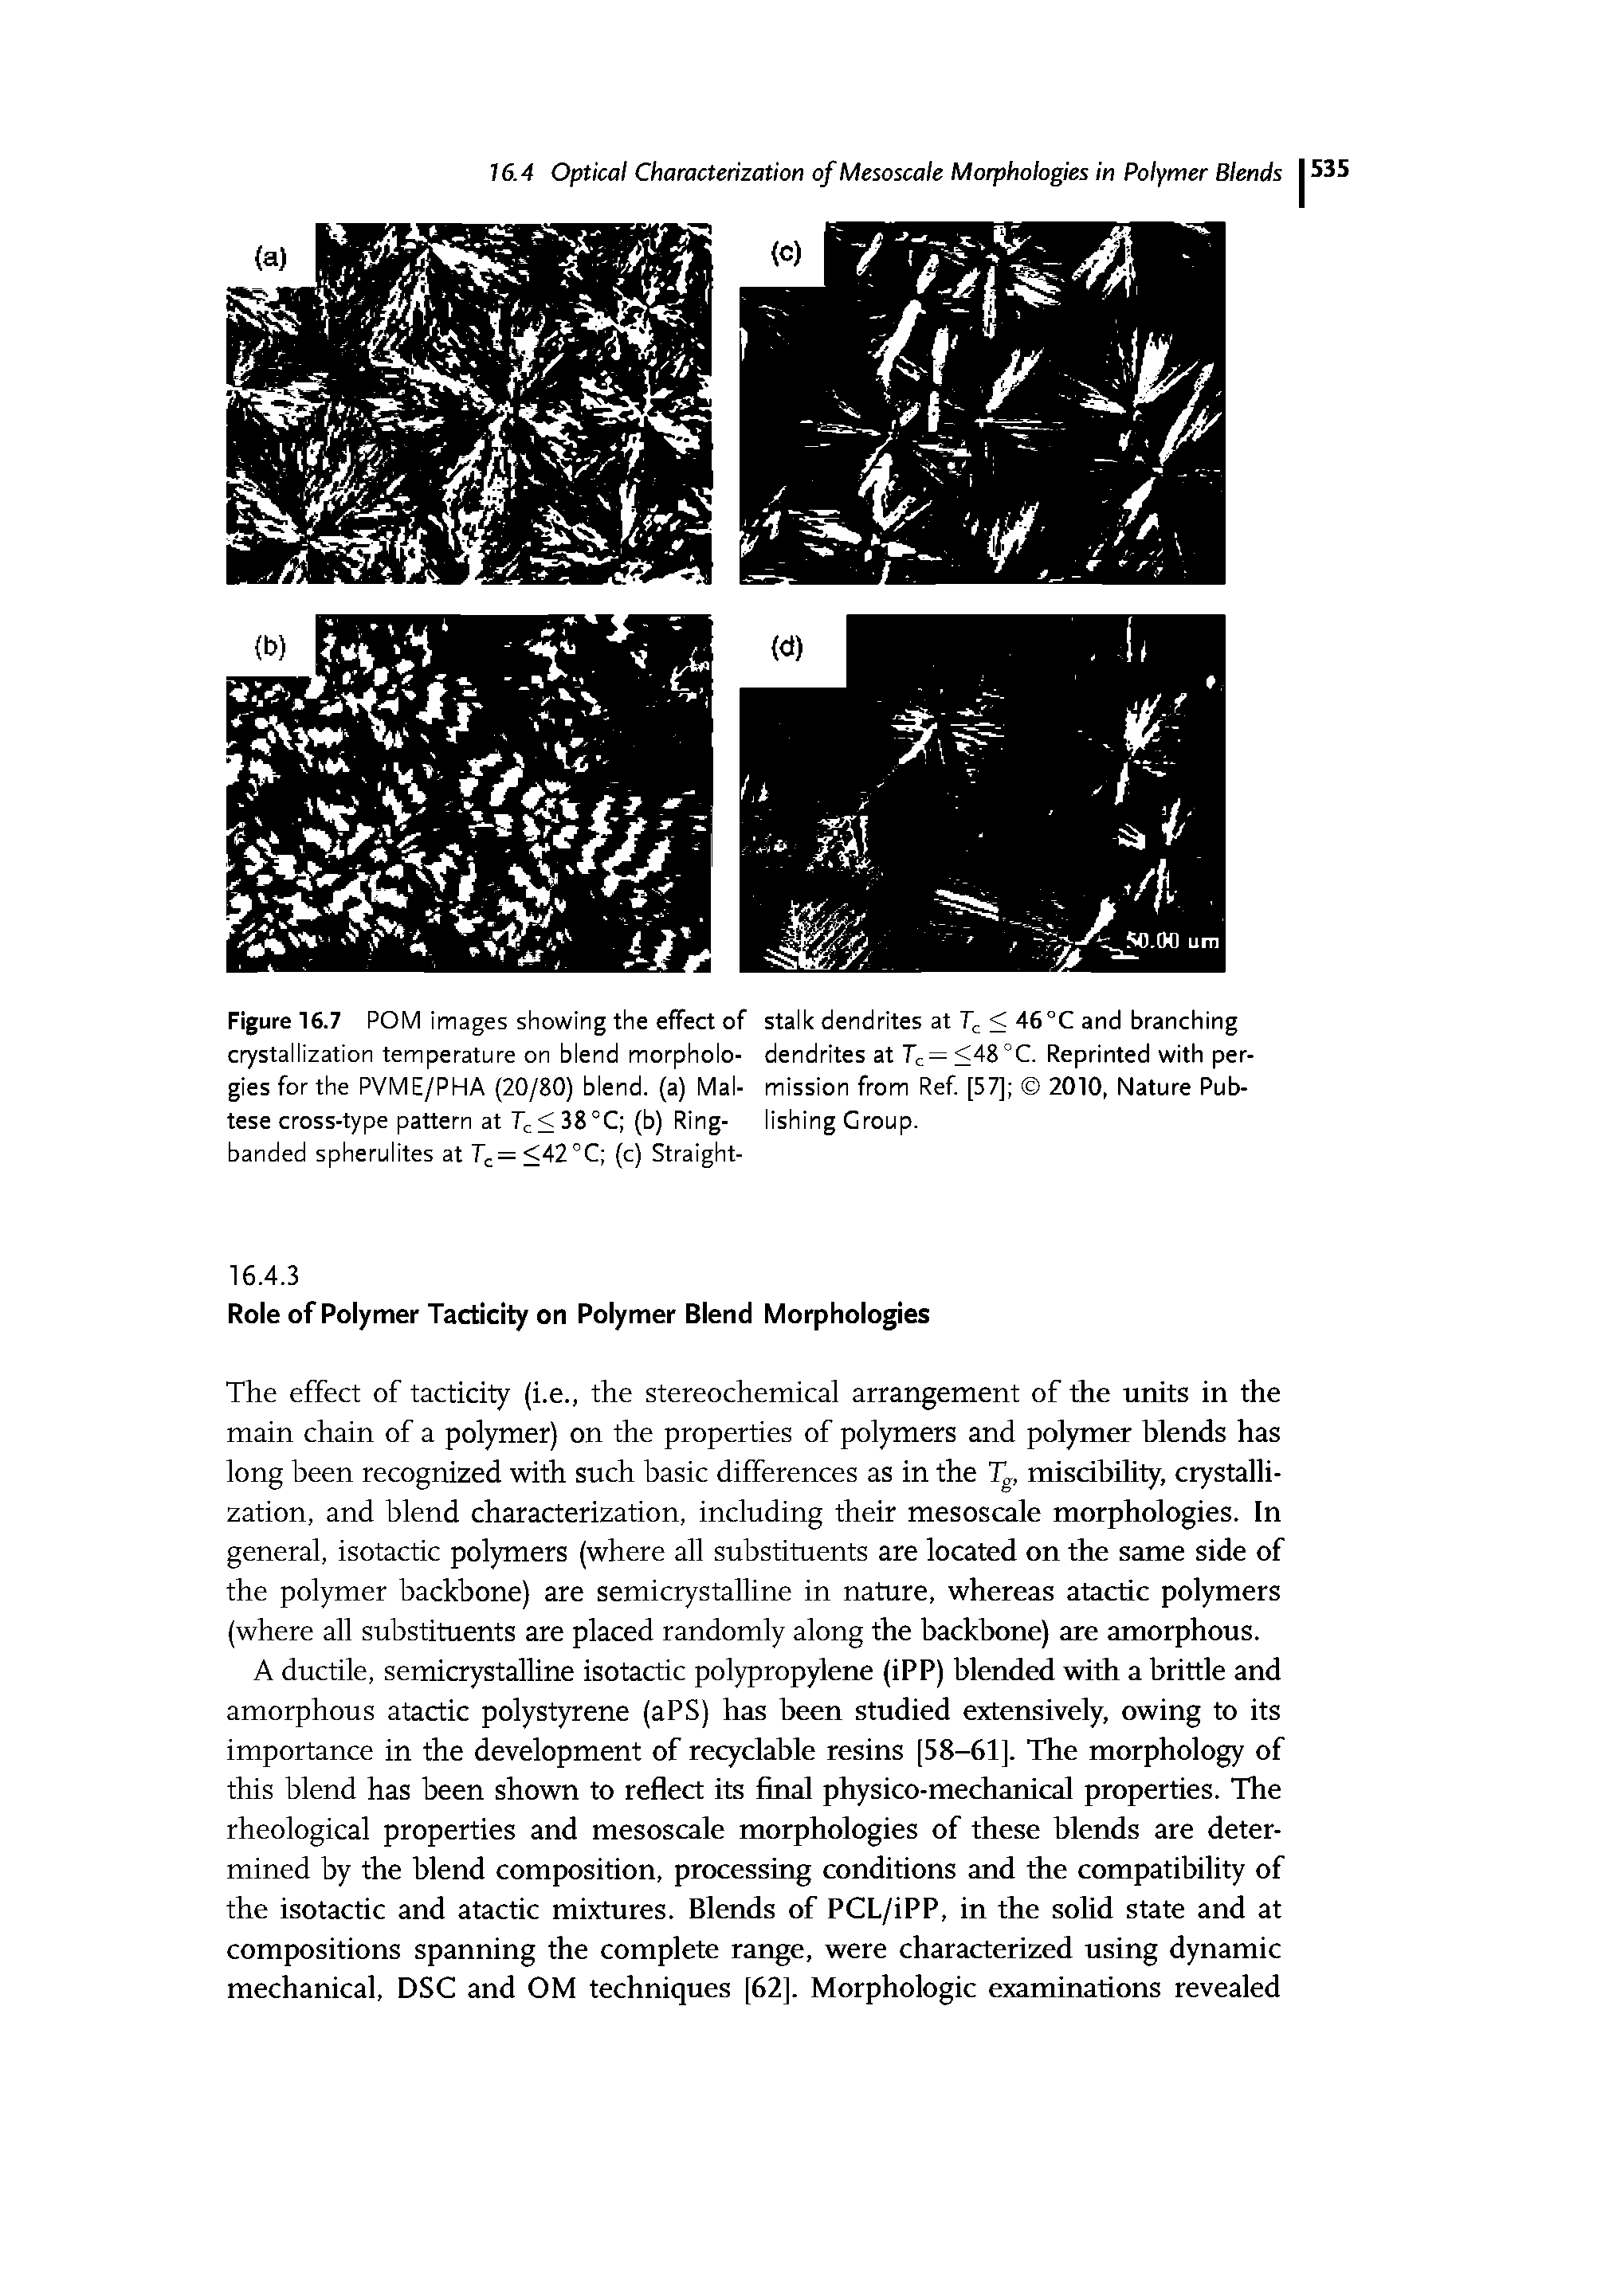 Figure 16.7 POM images showing the effect of stalk dendrites at < 46°C and branching costallization temperature on blend morpholo- dendrites at 7c=<48°C. Reprinted with per-gies for the PVME/PHA (20/80) blend, (a) Mai- mission from Ref. [57] 2010, Nature Pub-tese cross-type pattern at T < 38°C (b) Ring- lishing Croup, banded spherulites at 7 . = <42 C (c) Straight-...